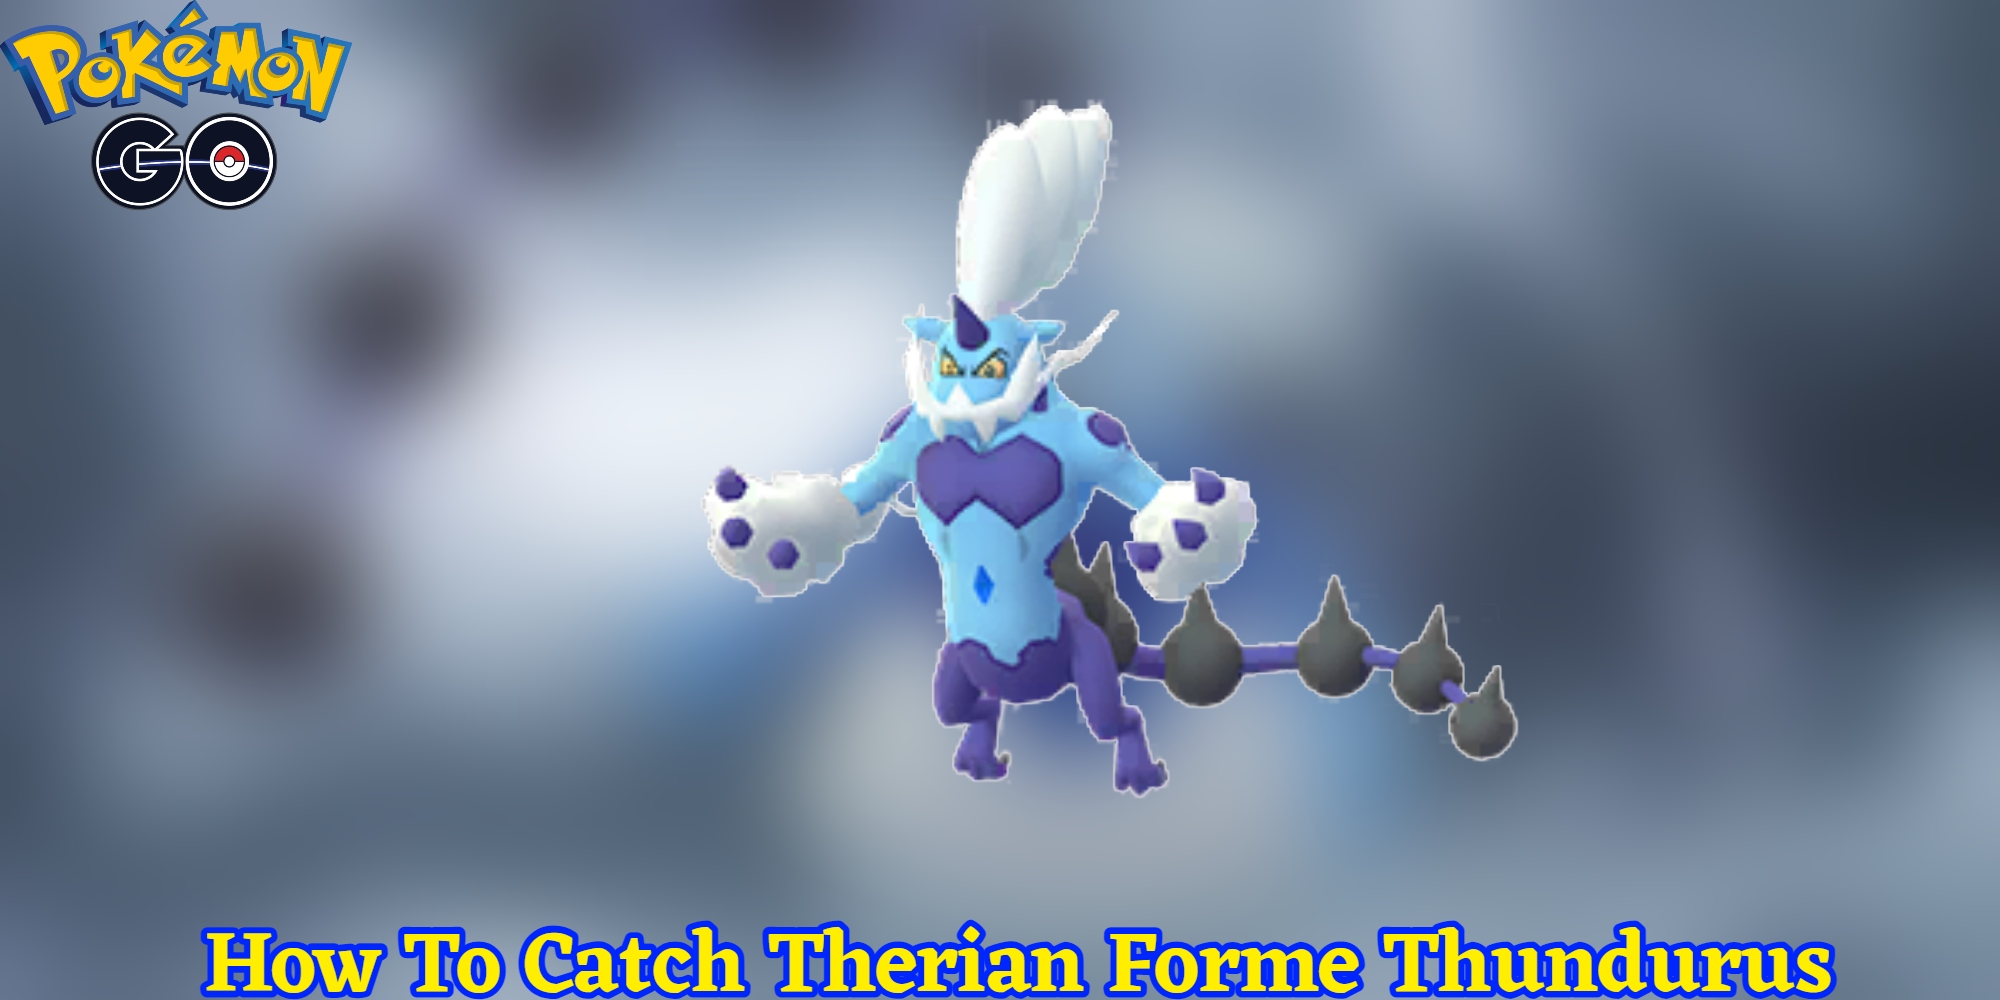 You are currently viewing How To Catch Therian Forme Thundurus in Pokémon Go